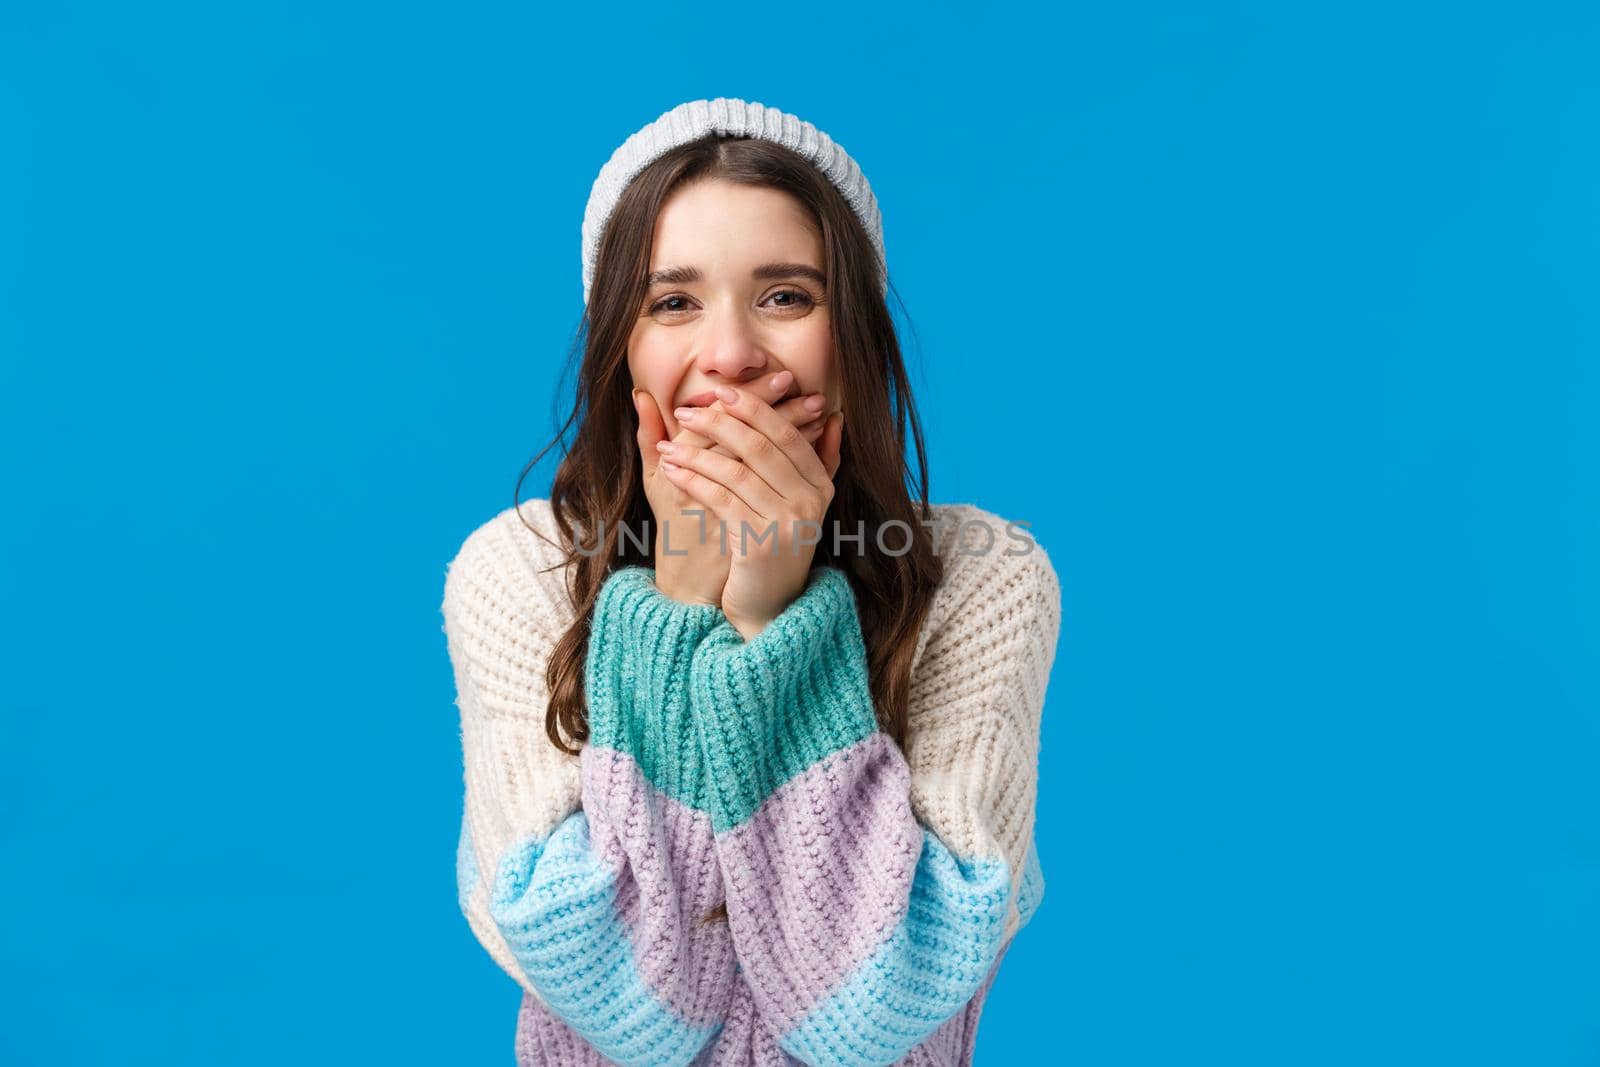 Emotions, new year, winter holidays concept. Cheerful charismatic feminine young woman laughing out loud, chuckle and shut mouth with hands, giggle over something funny, blue background.